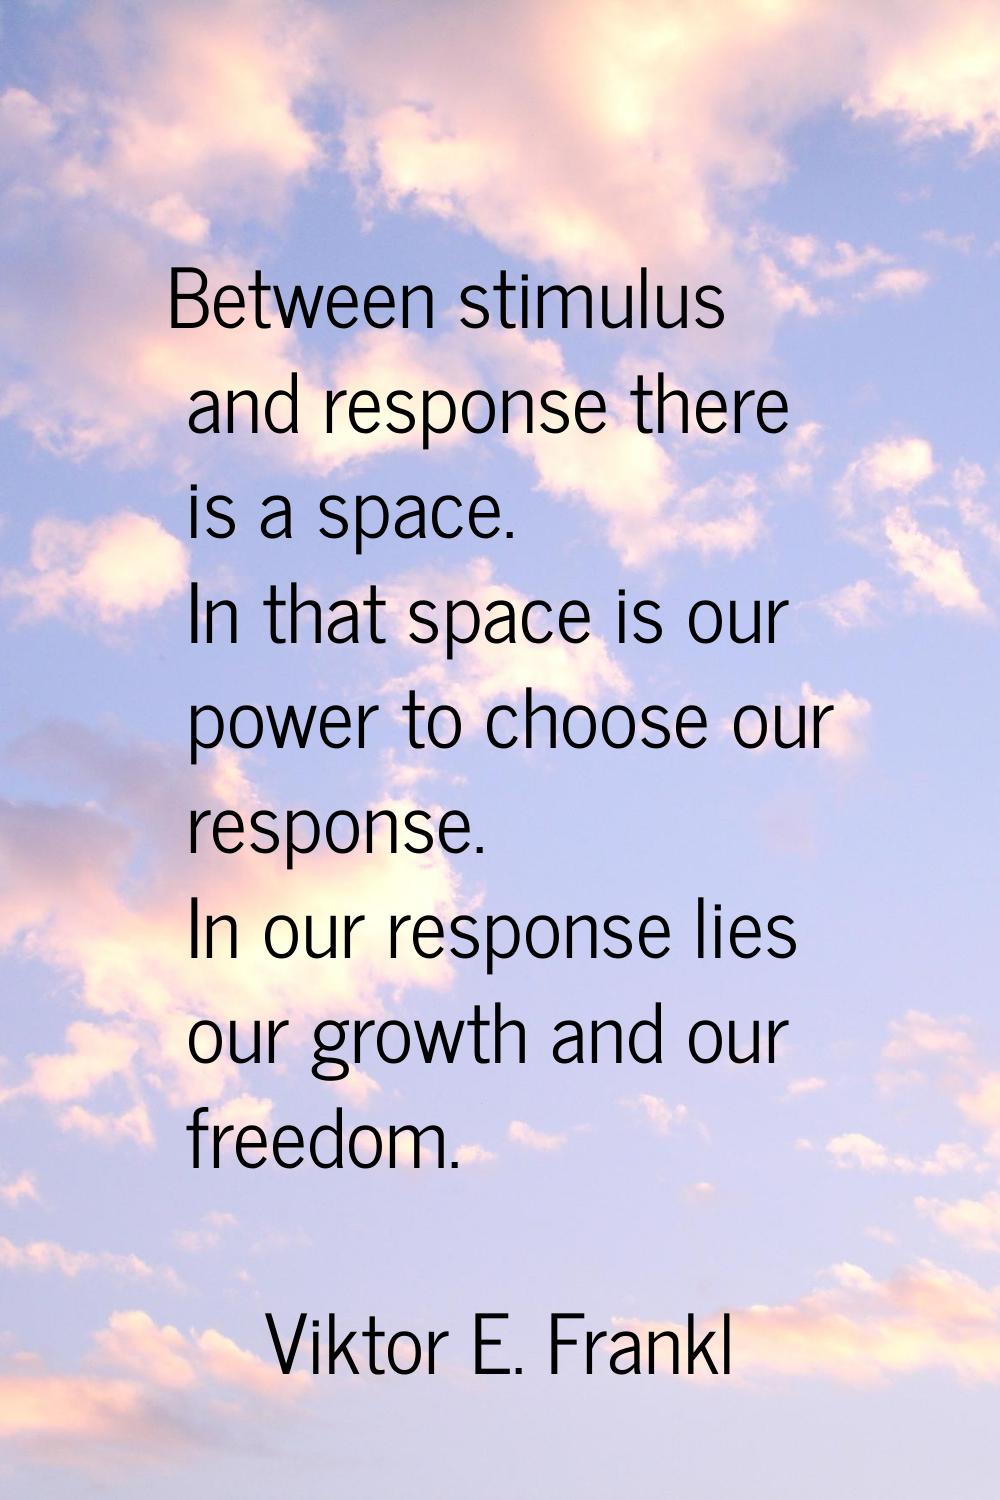 Between stimulus and response there is a space. In that space is our power to choose our response. 